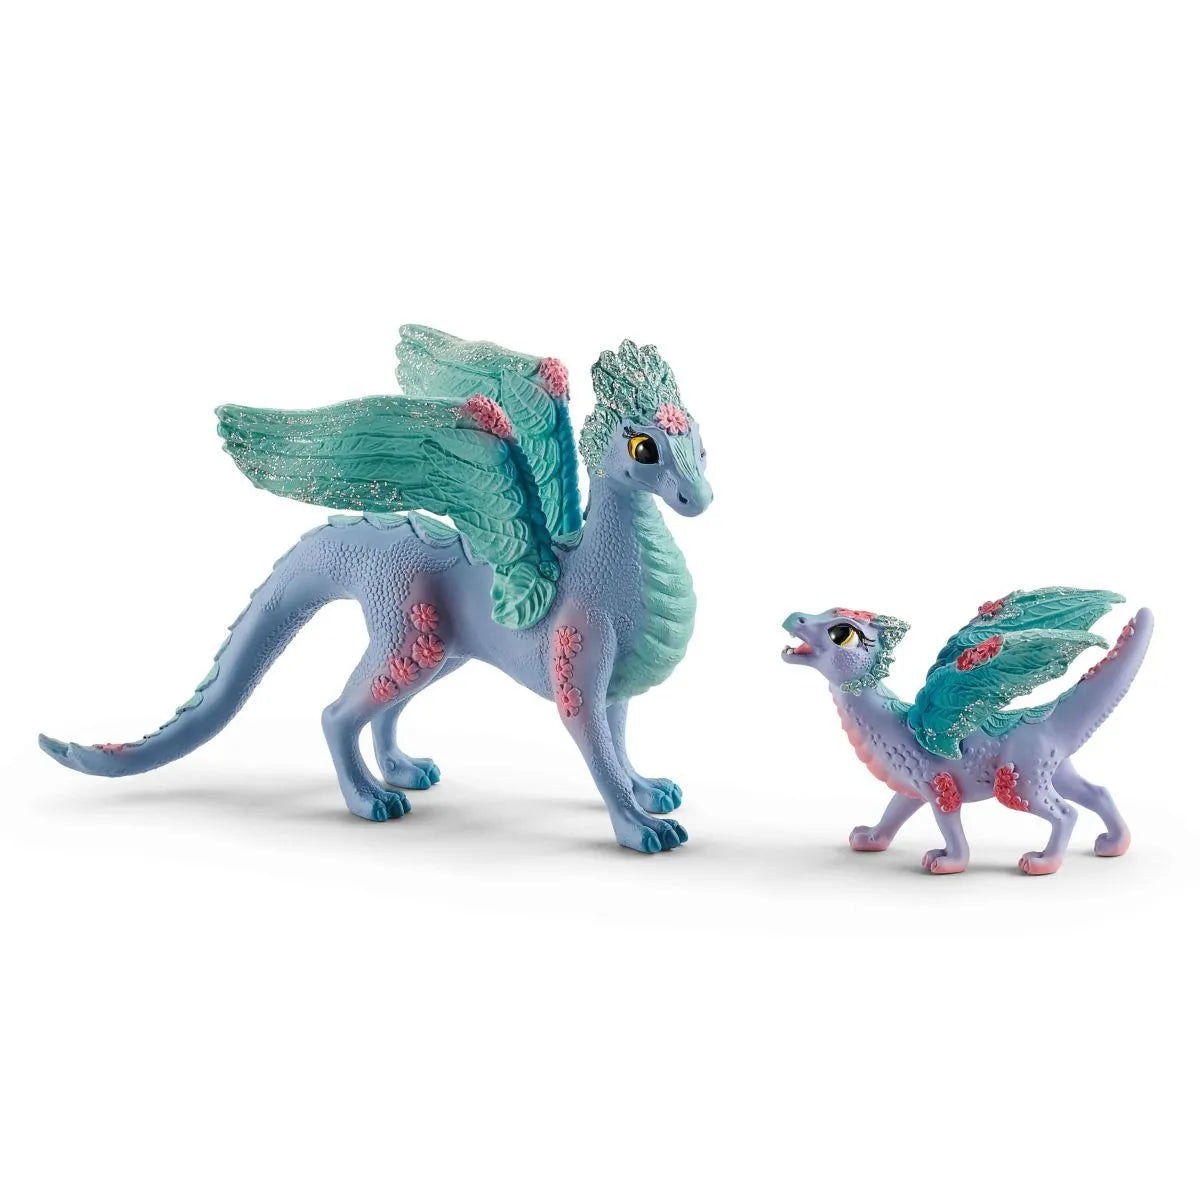 SL70592 Schleich Blossom Dragon Mother and Child